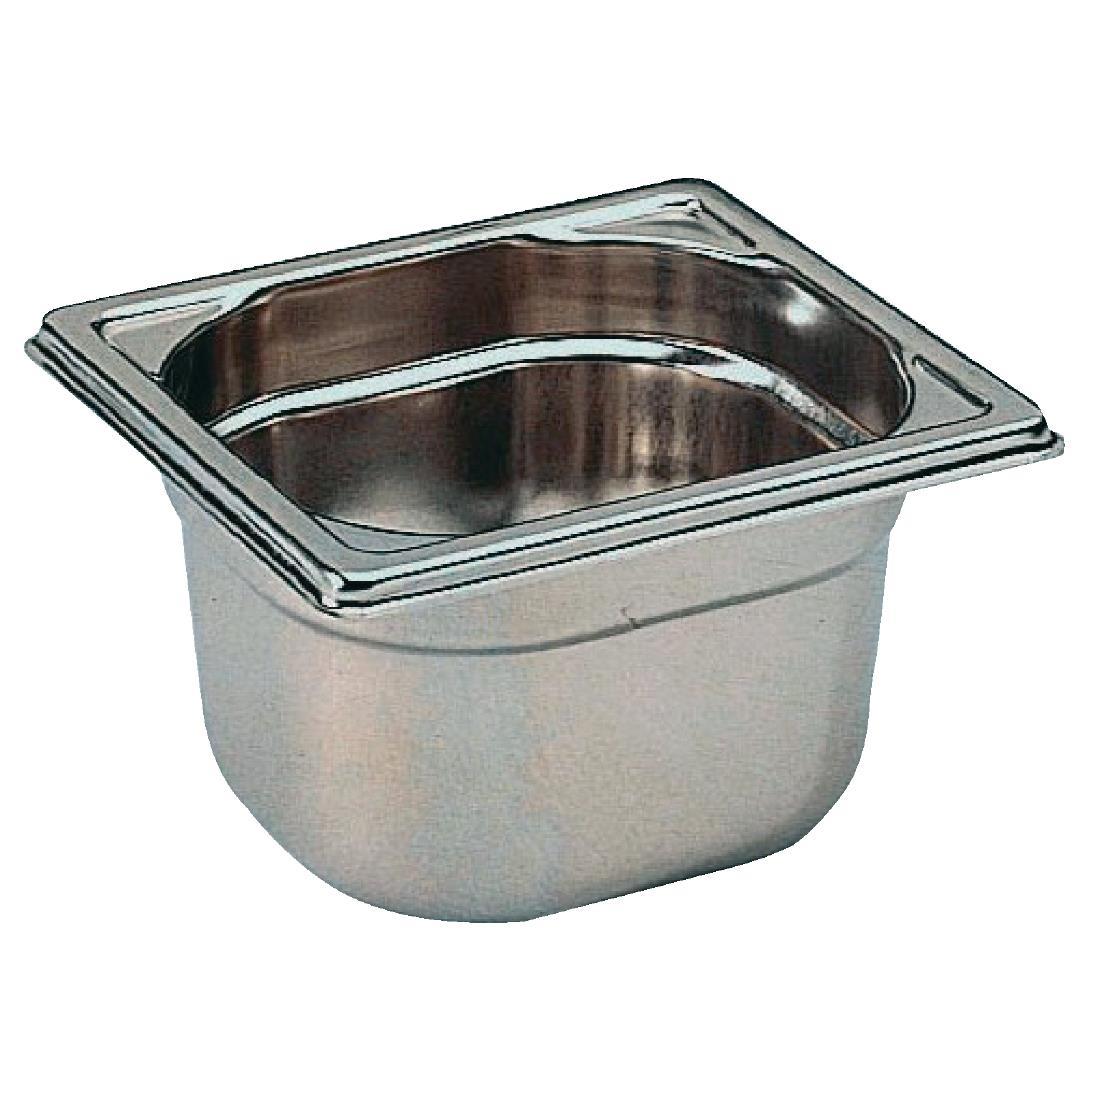 Matfer Bourgeat Stainless Steel 1/6 Gastronorm Pan 65mm - K076  - 1